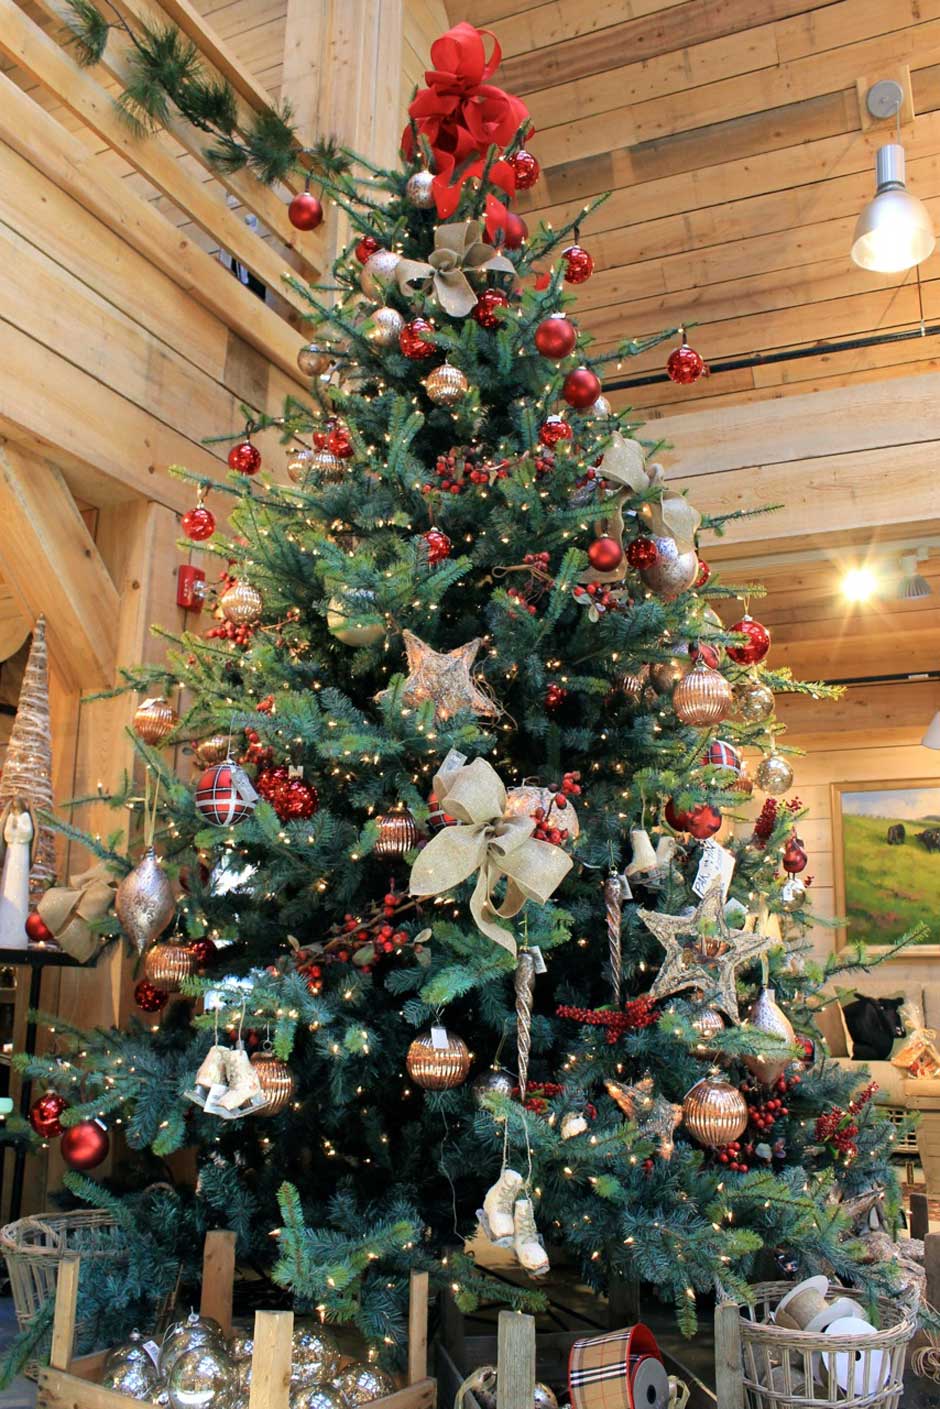 PHOTO: This Is What a $4,200 Christmas Tree Looks Like